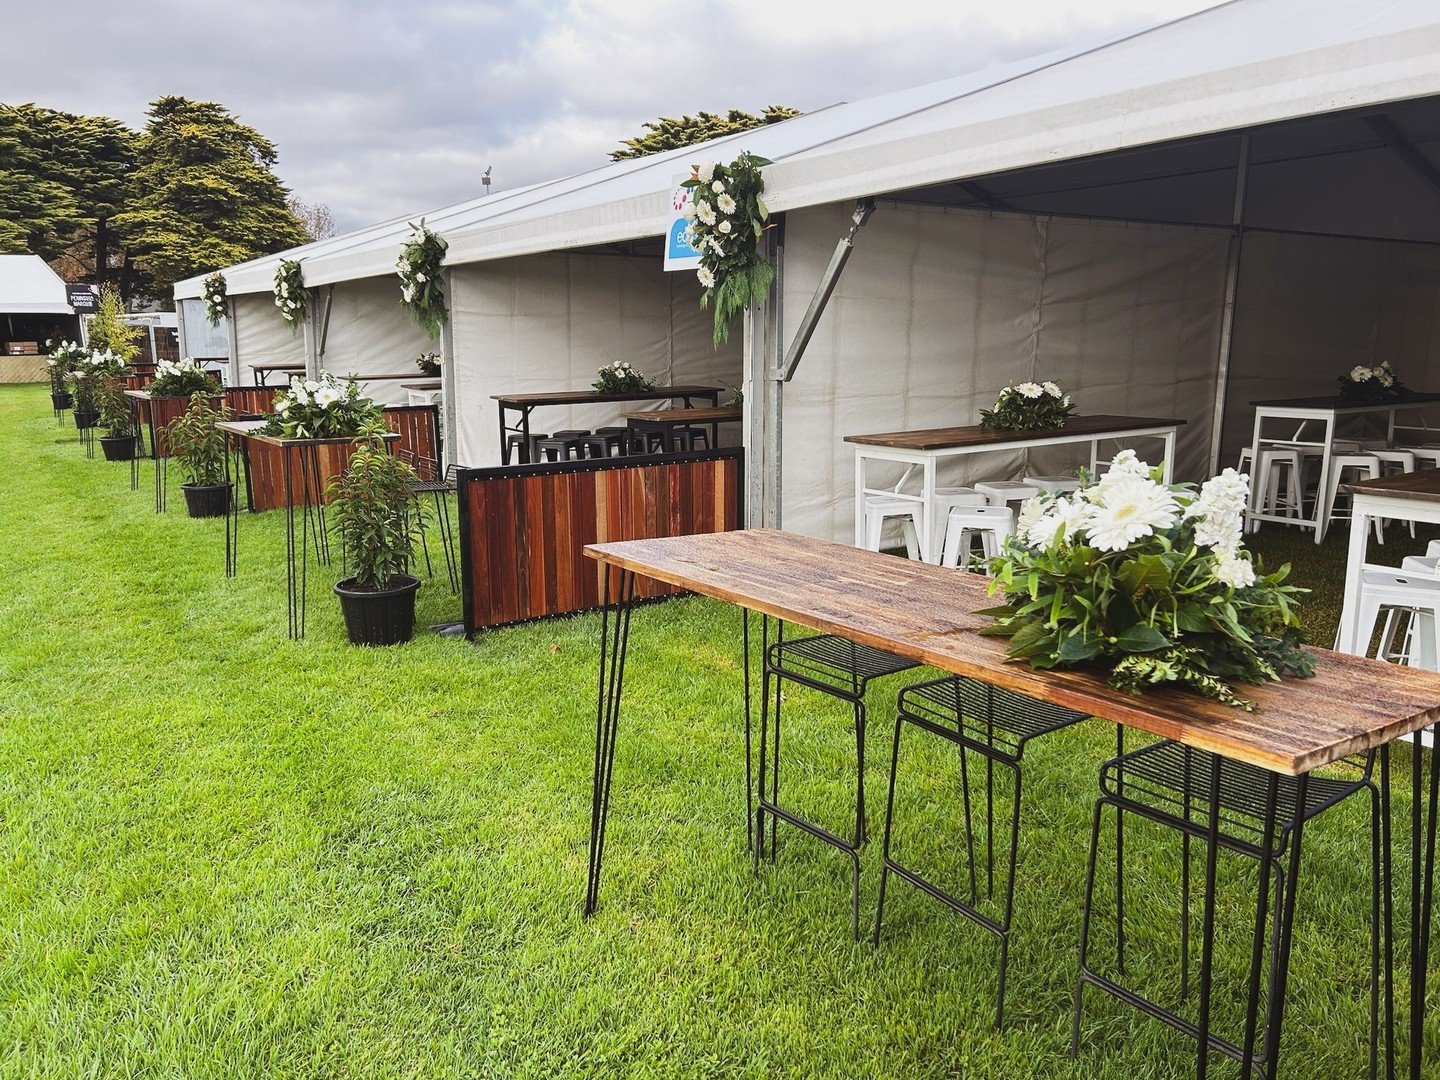 Pin leg table options on our walnut tables. These look great undressed but napery is also available for a more finished look. ⁠
⁠
⁠
⁠
⁠
#tabelhire #chairhrie #eventhire #eventrental #mrc #morningtonevents #morningtonracecourse #partyhiremornington #h